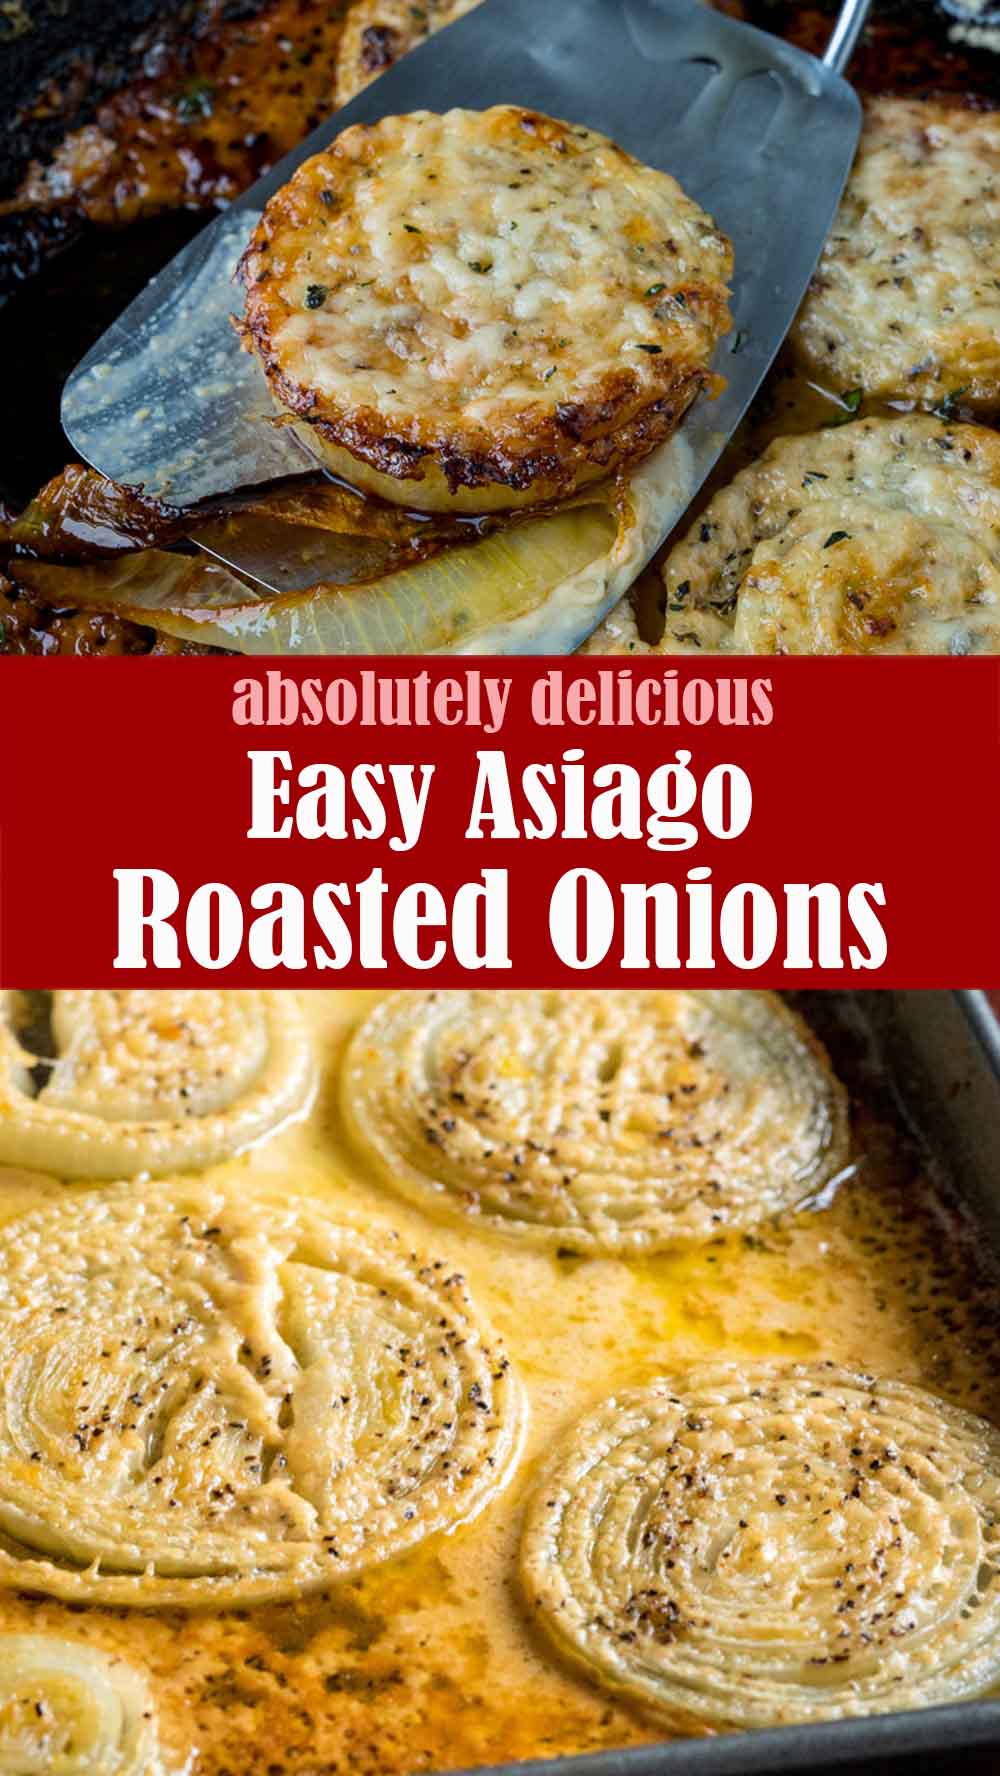 Easy Asiago Roasted Onions